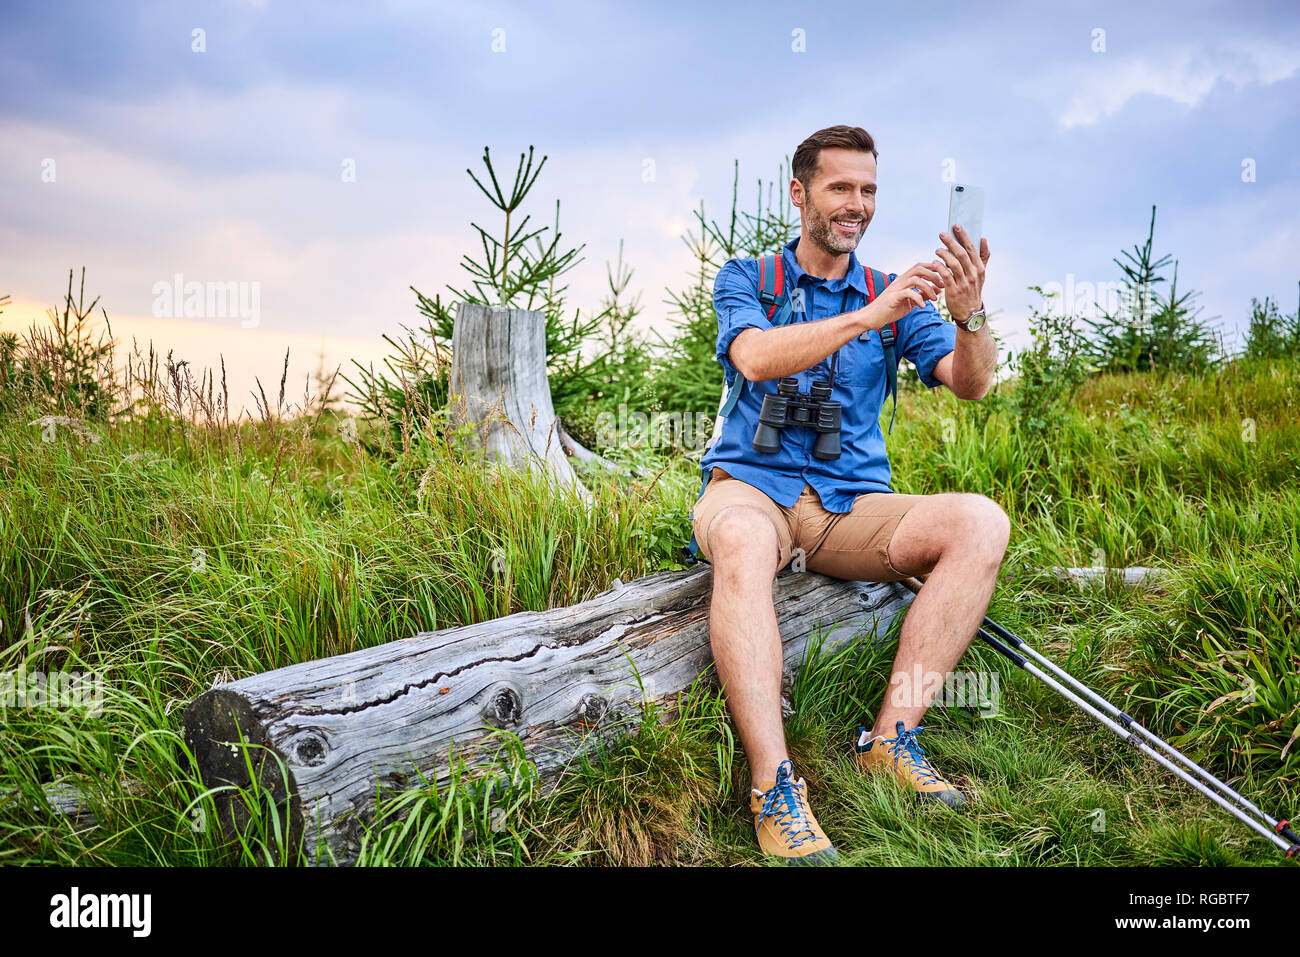 Man taking a picture with his cell phone during hiking trip Stock Photo